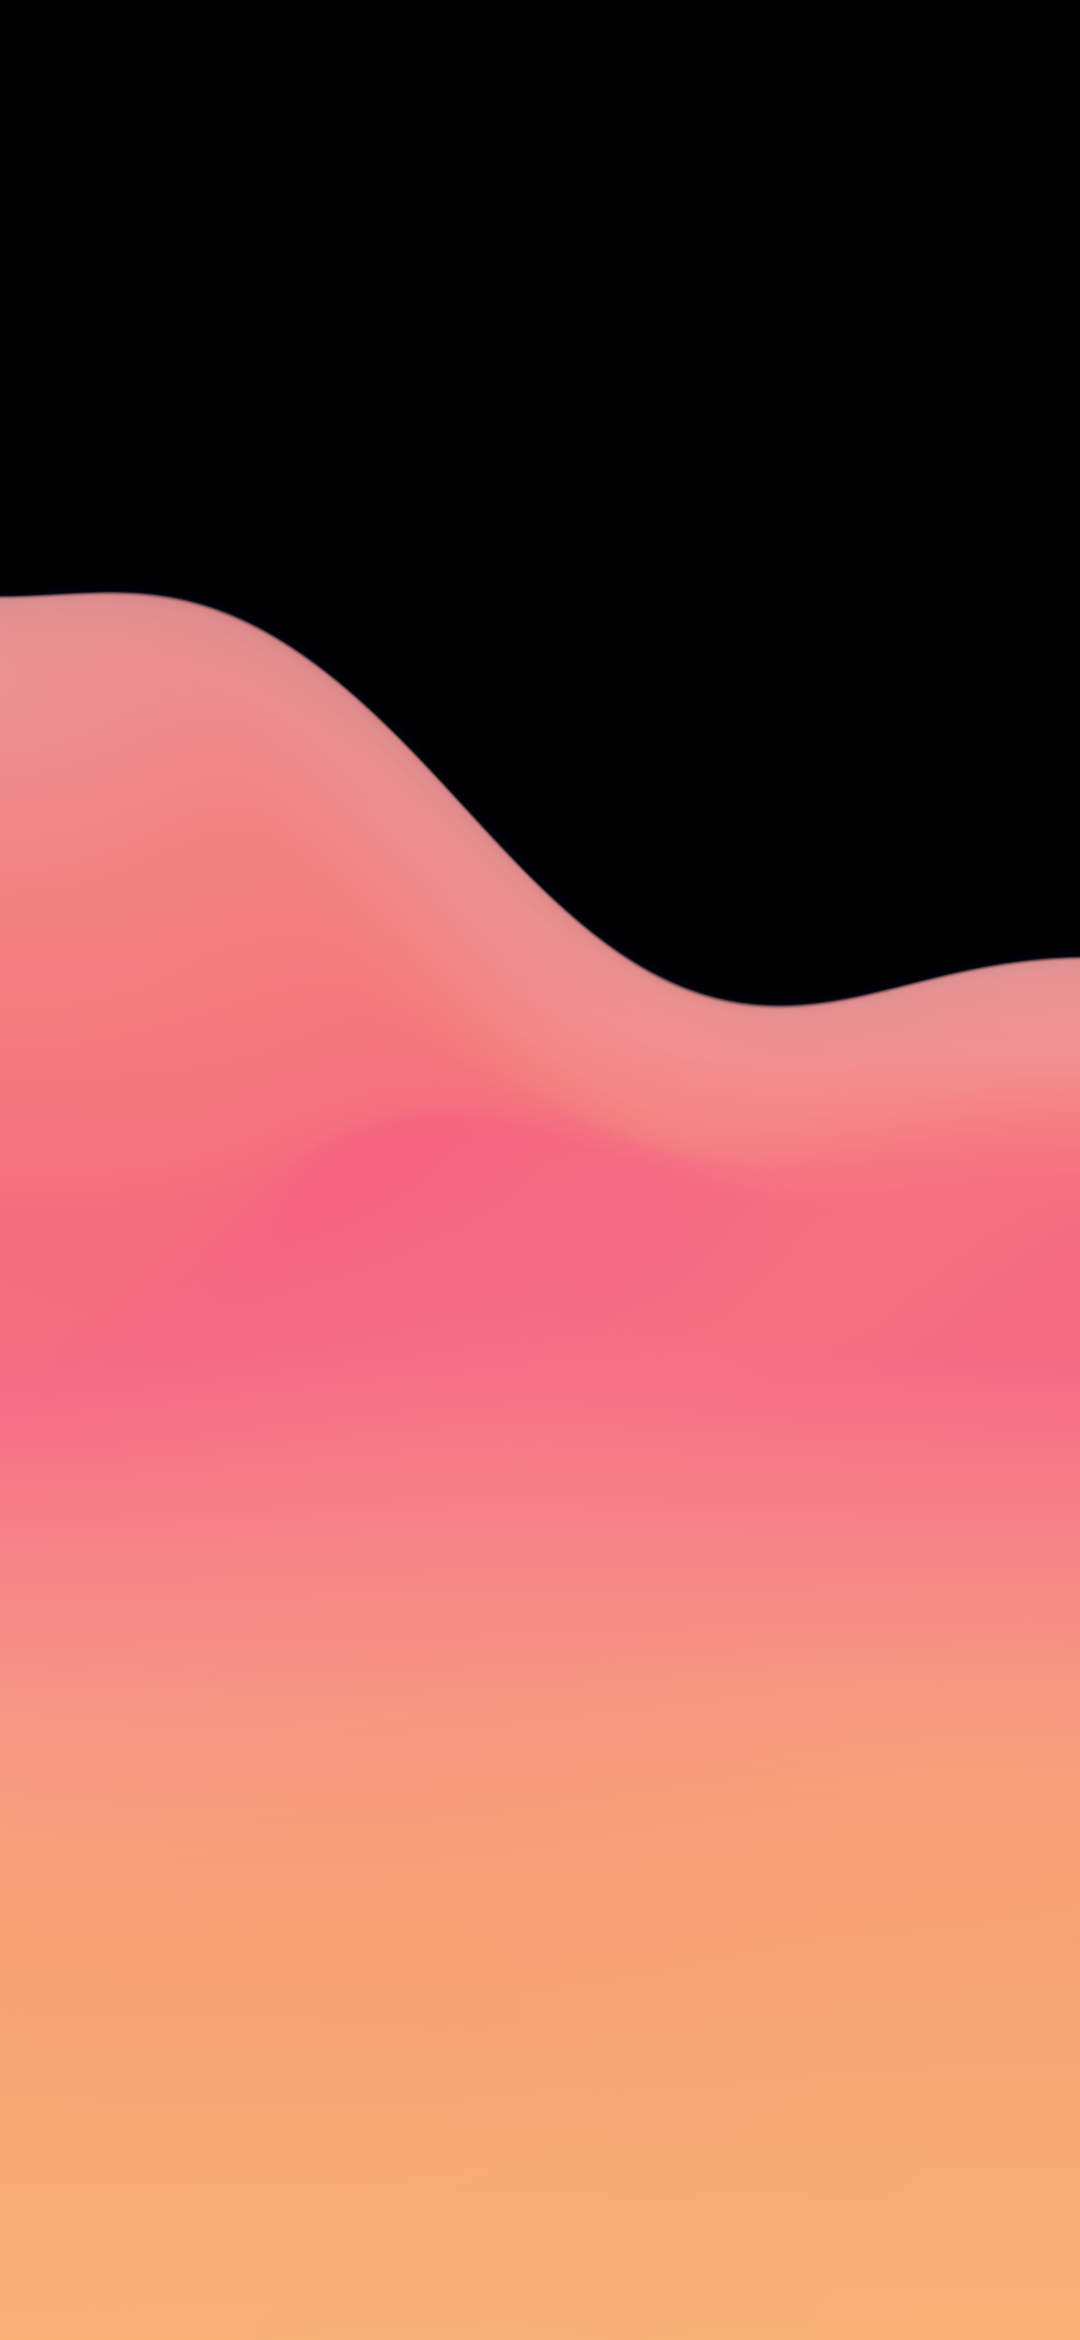 1080x2340 Smooth vector wallpaper pack for iPhone